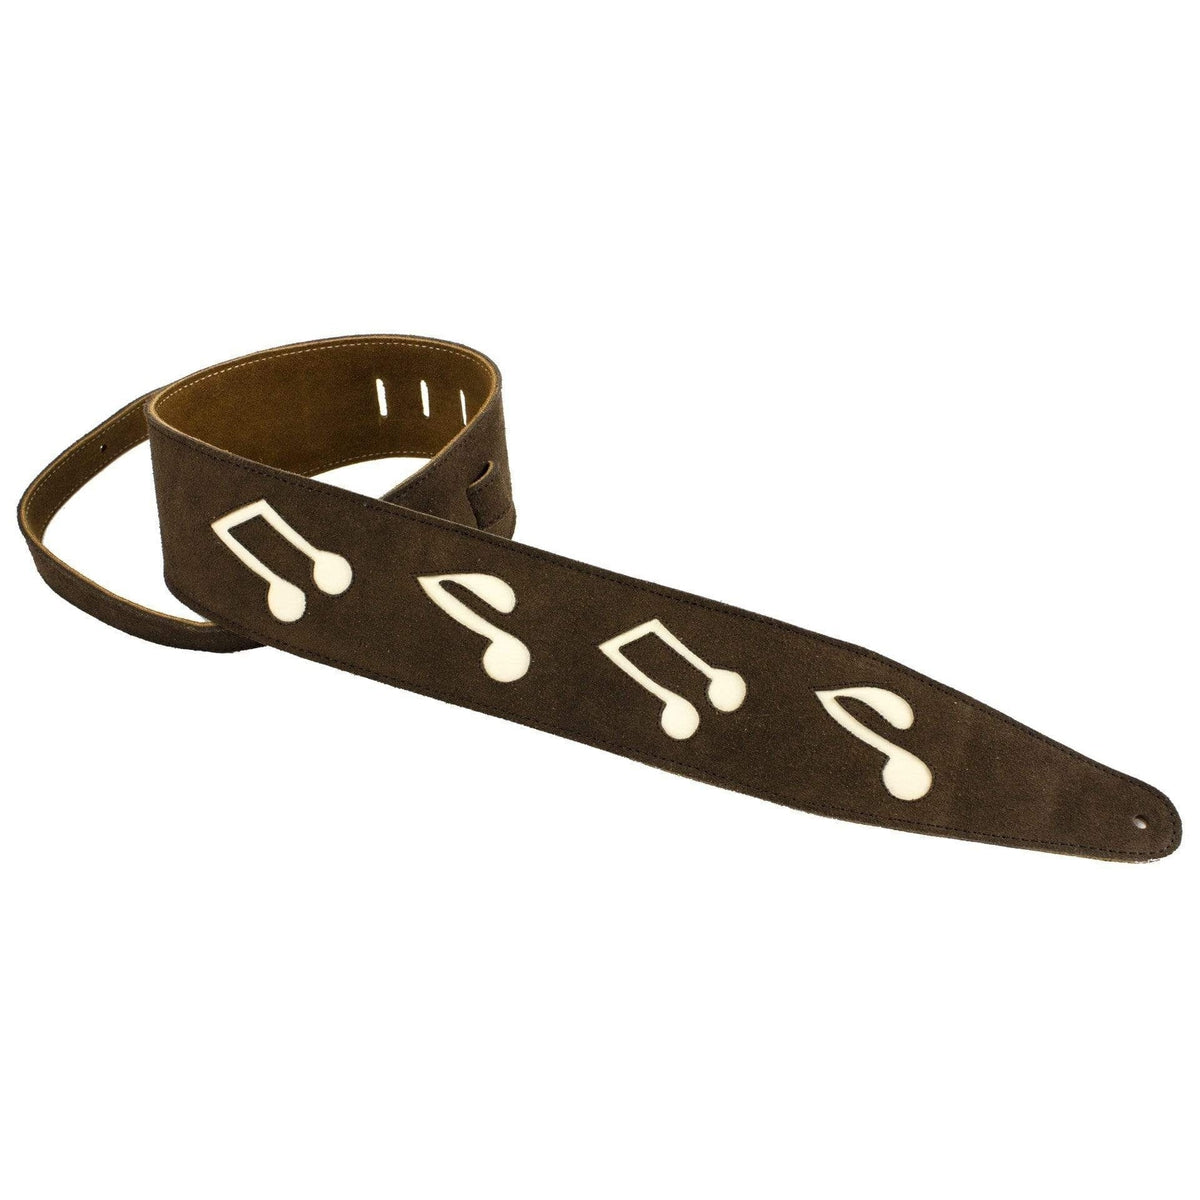 Henry Heller 3" Glove Leather Guitar Strap | Music Notes